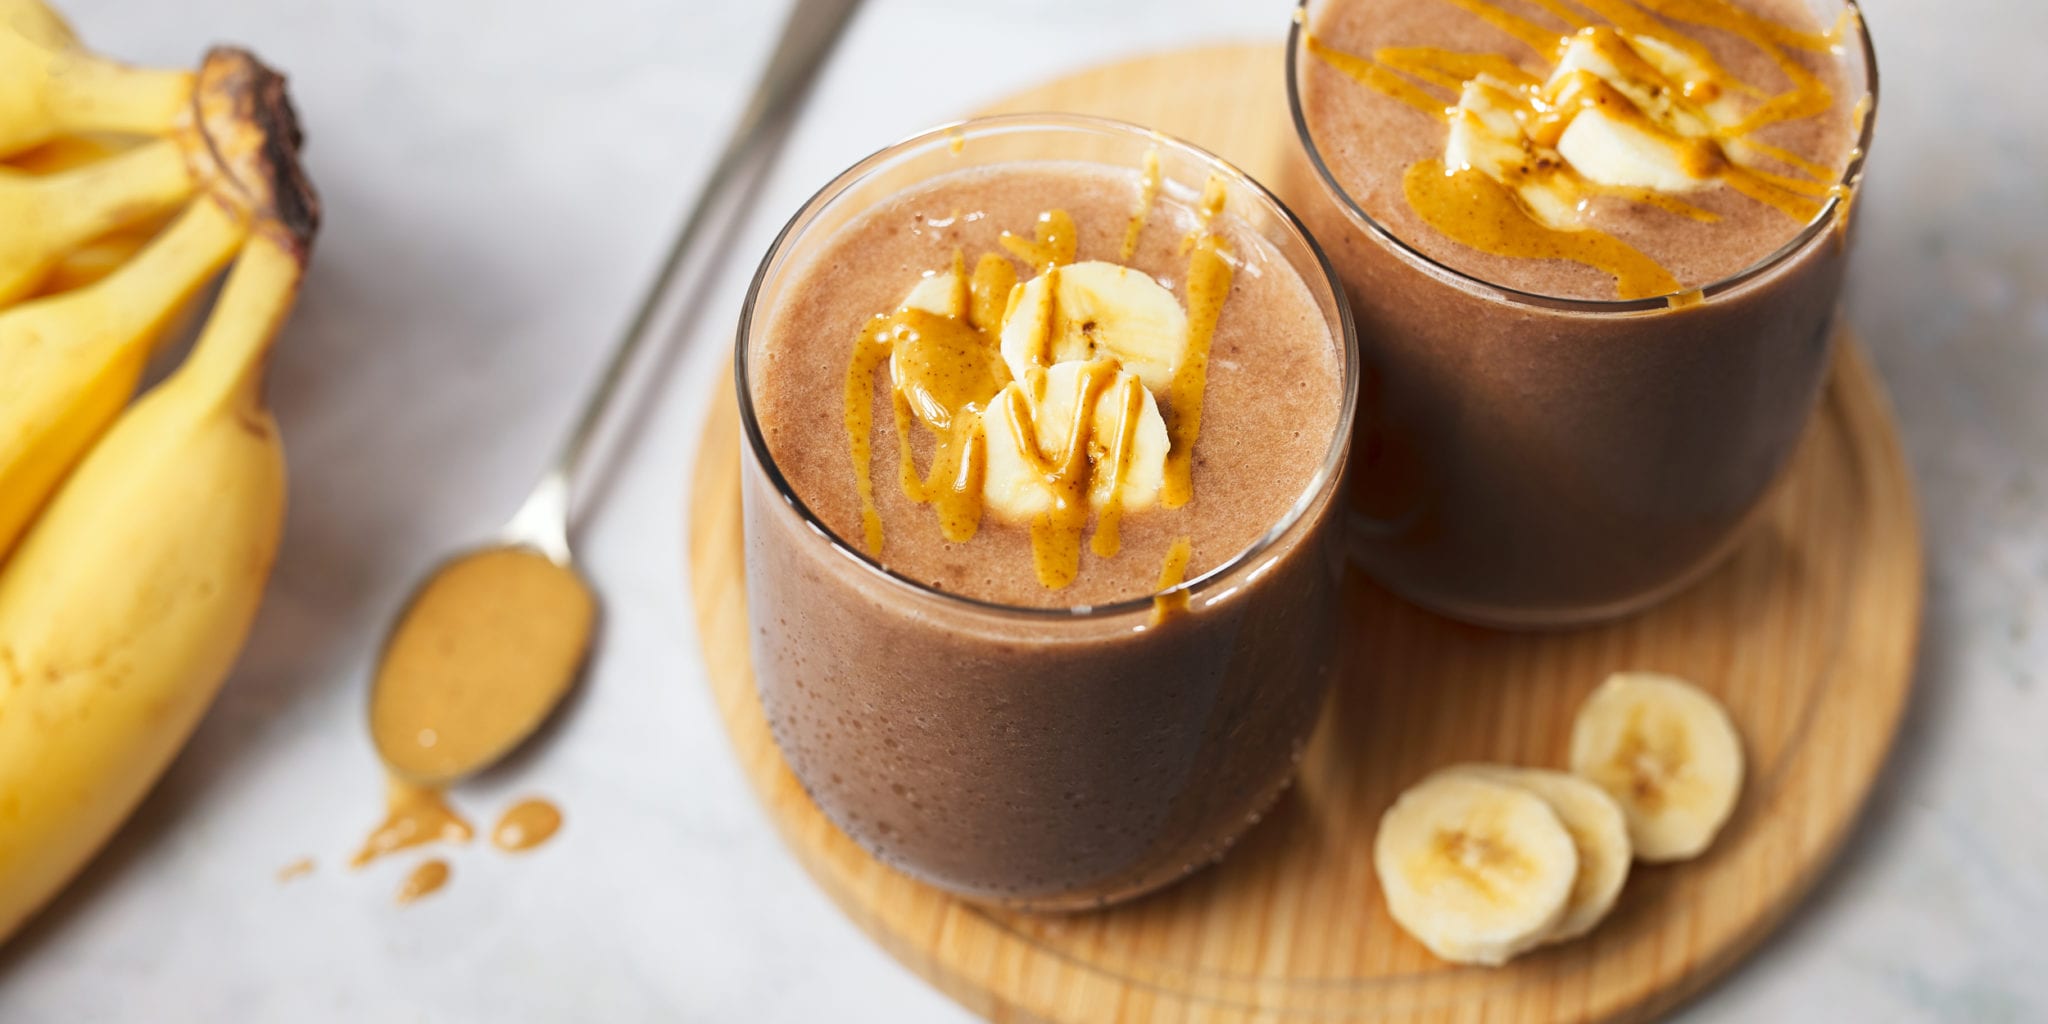 can-a-protein-shake-at-breakfast-help-you-reach-your-goals?